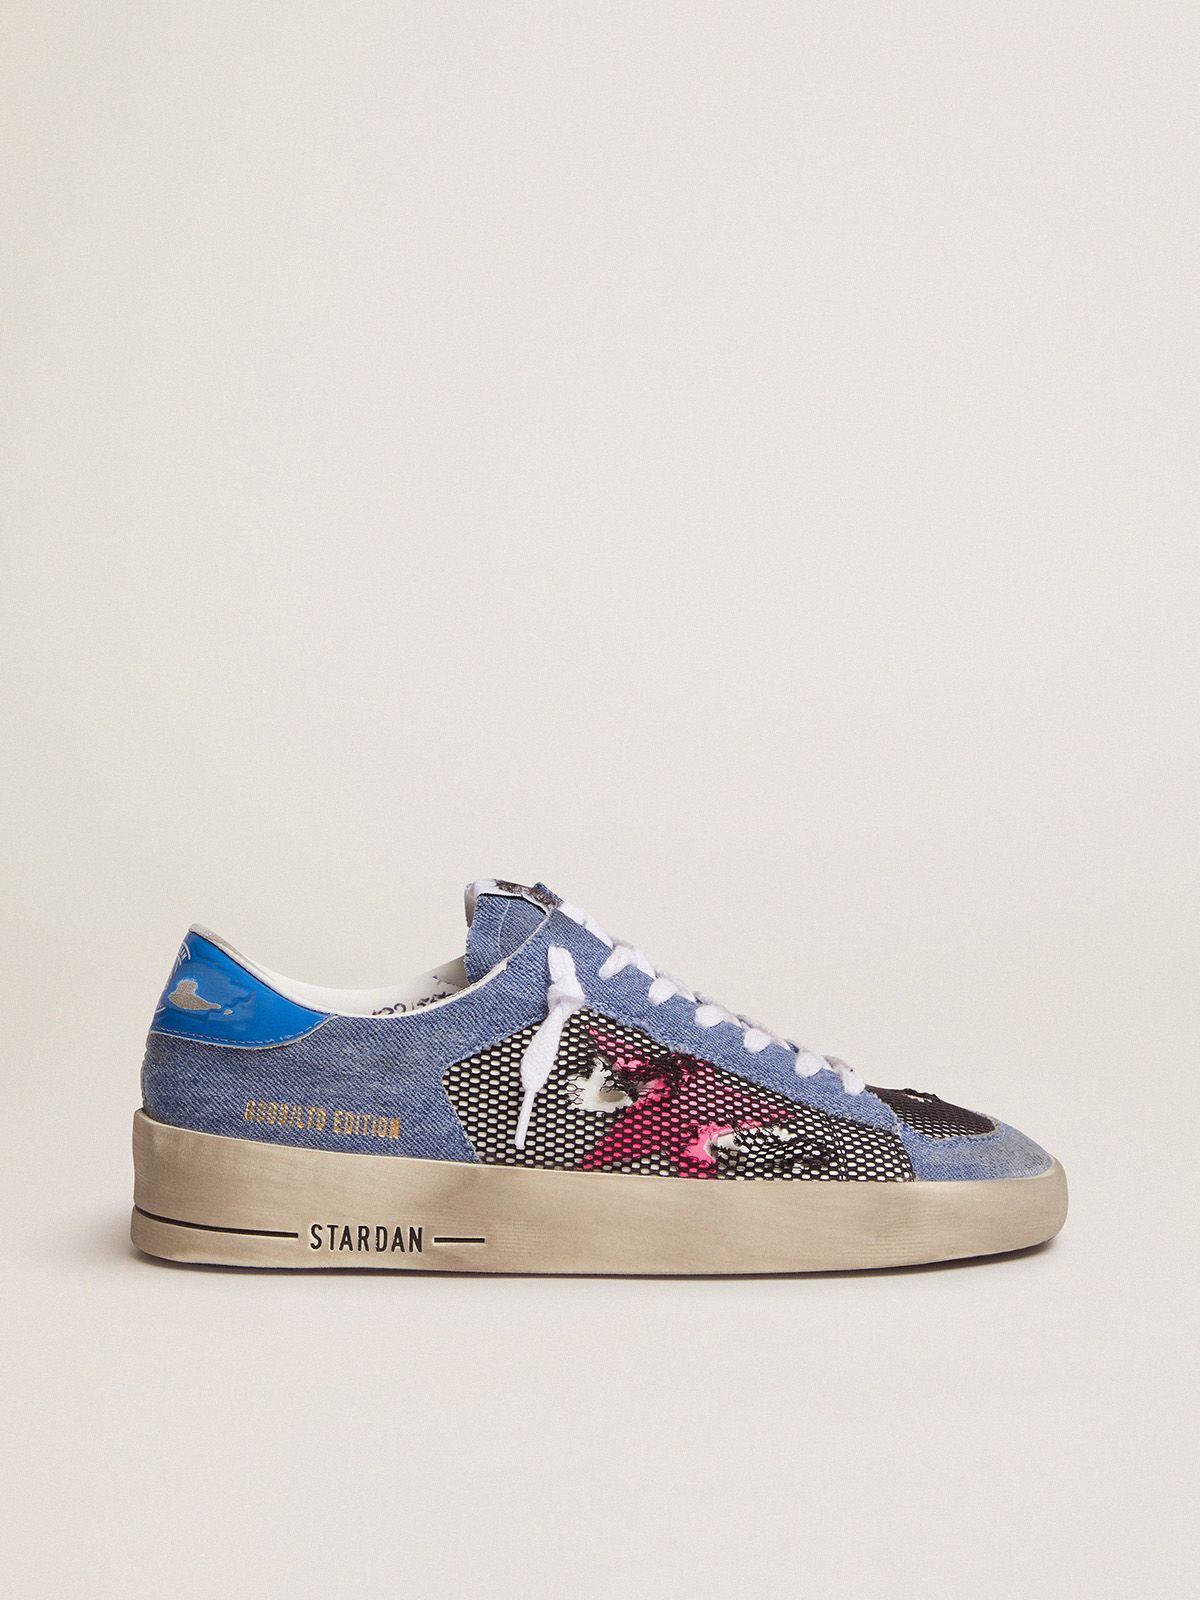 golden goose denim with fuchsia Edition star LAB Women's Limited sneakers Stardan